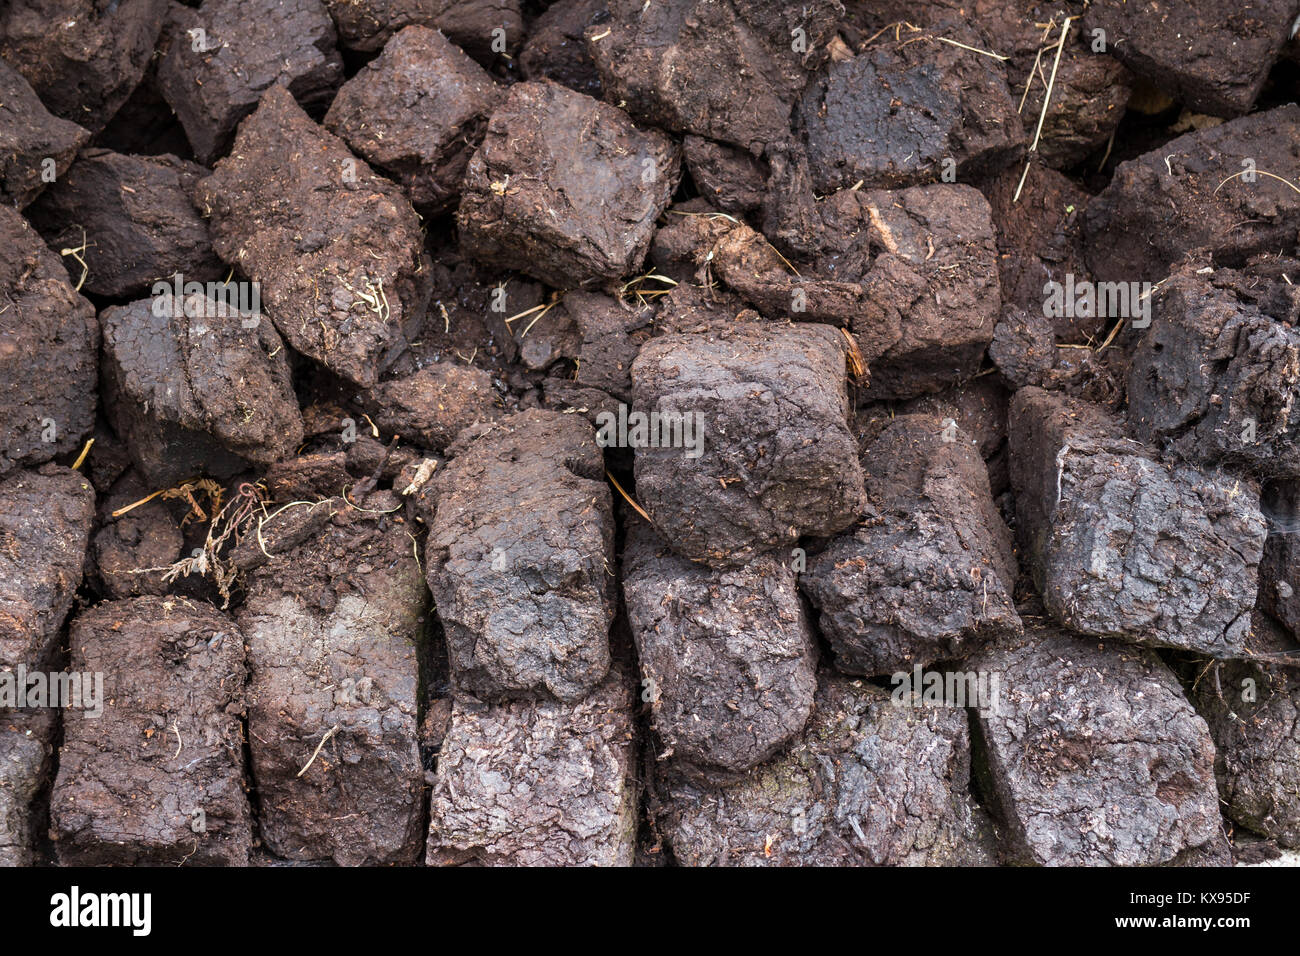 cutted peat, Ireland, Europe Stock Photo